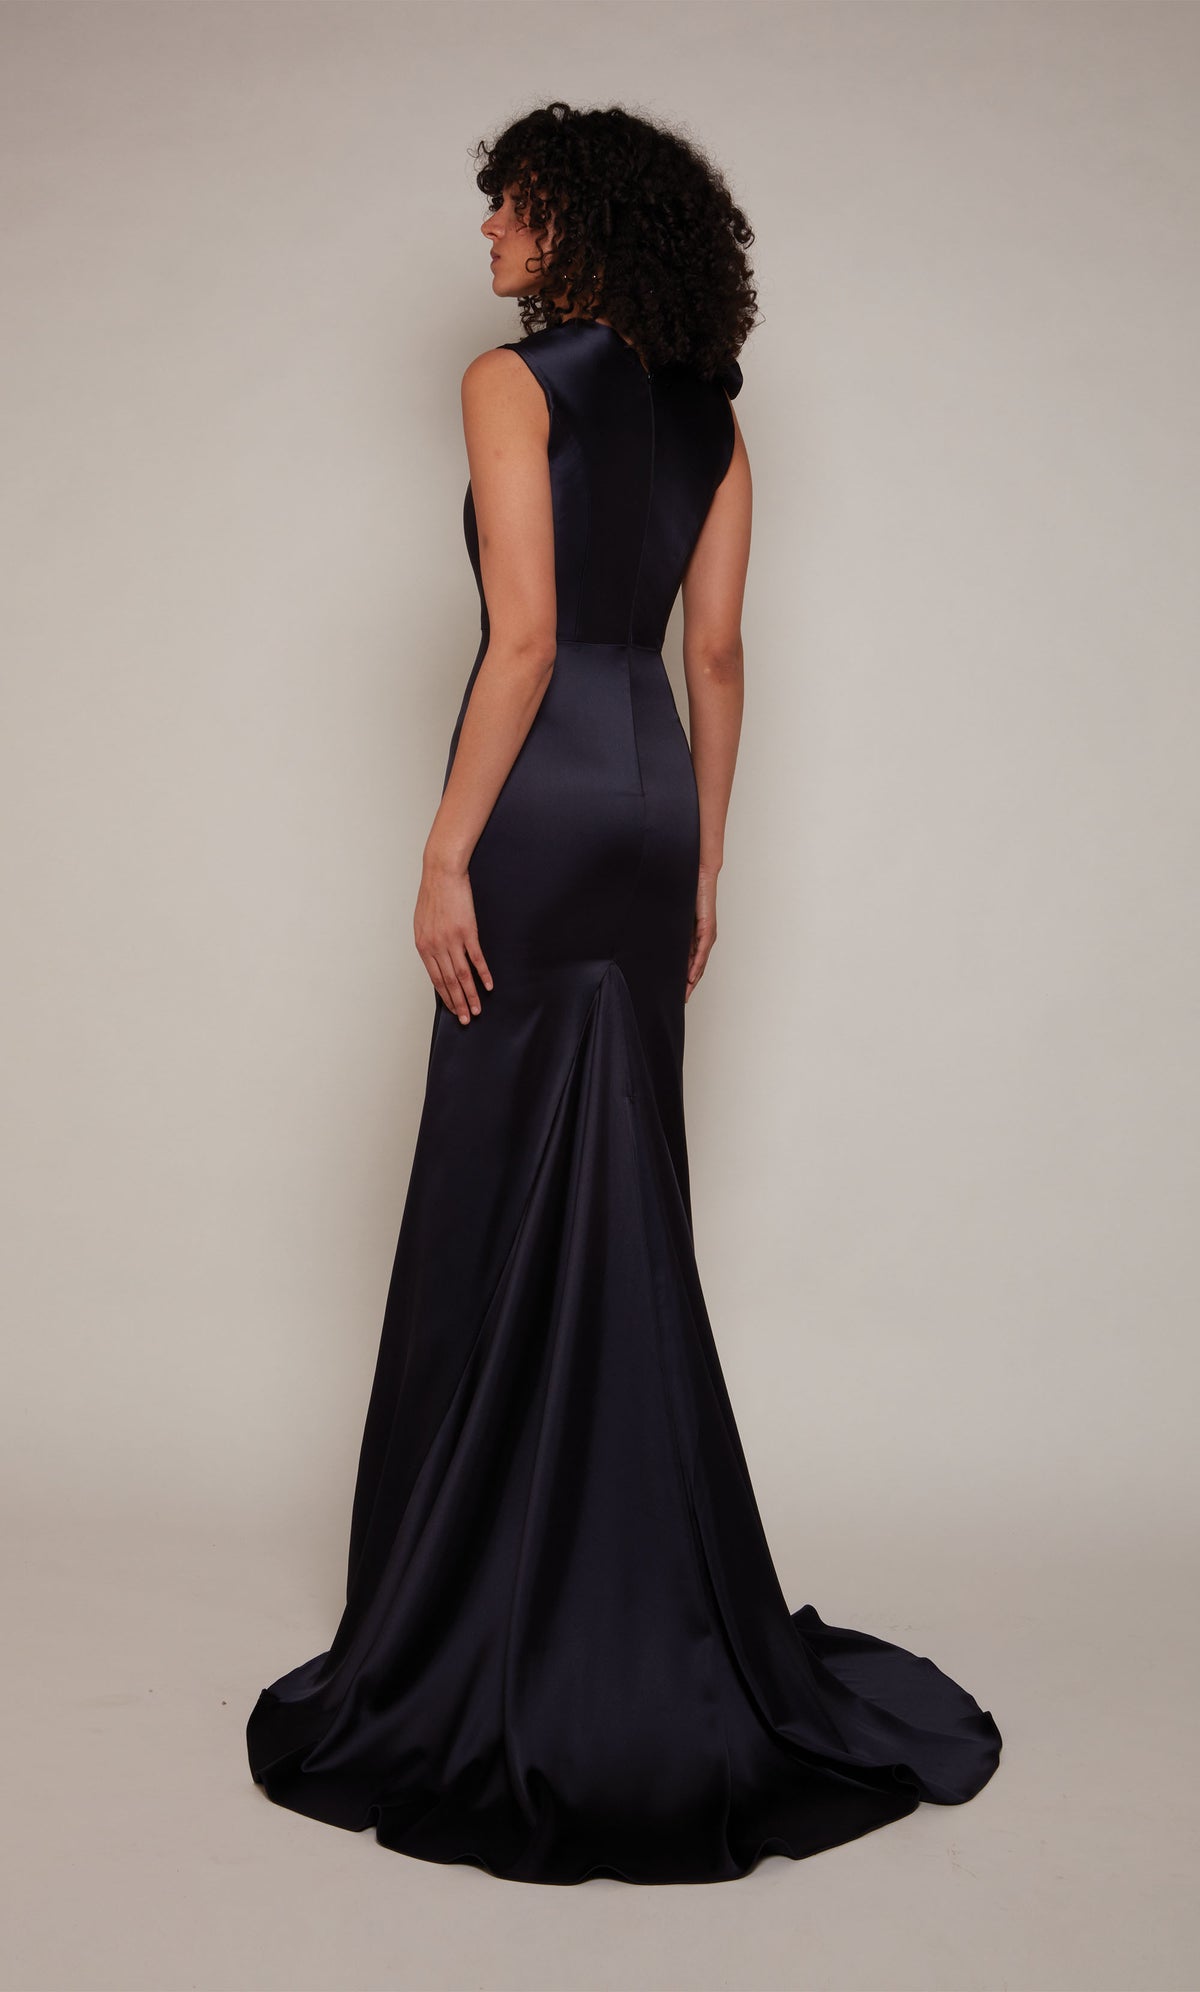 Midnight blue duchess satin gown with an closed zipper back, fit and flare silhouette, and train.